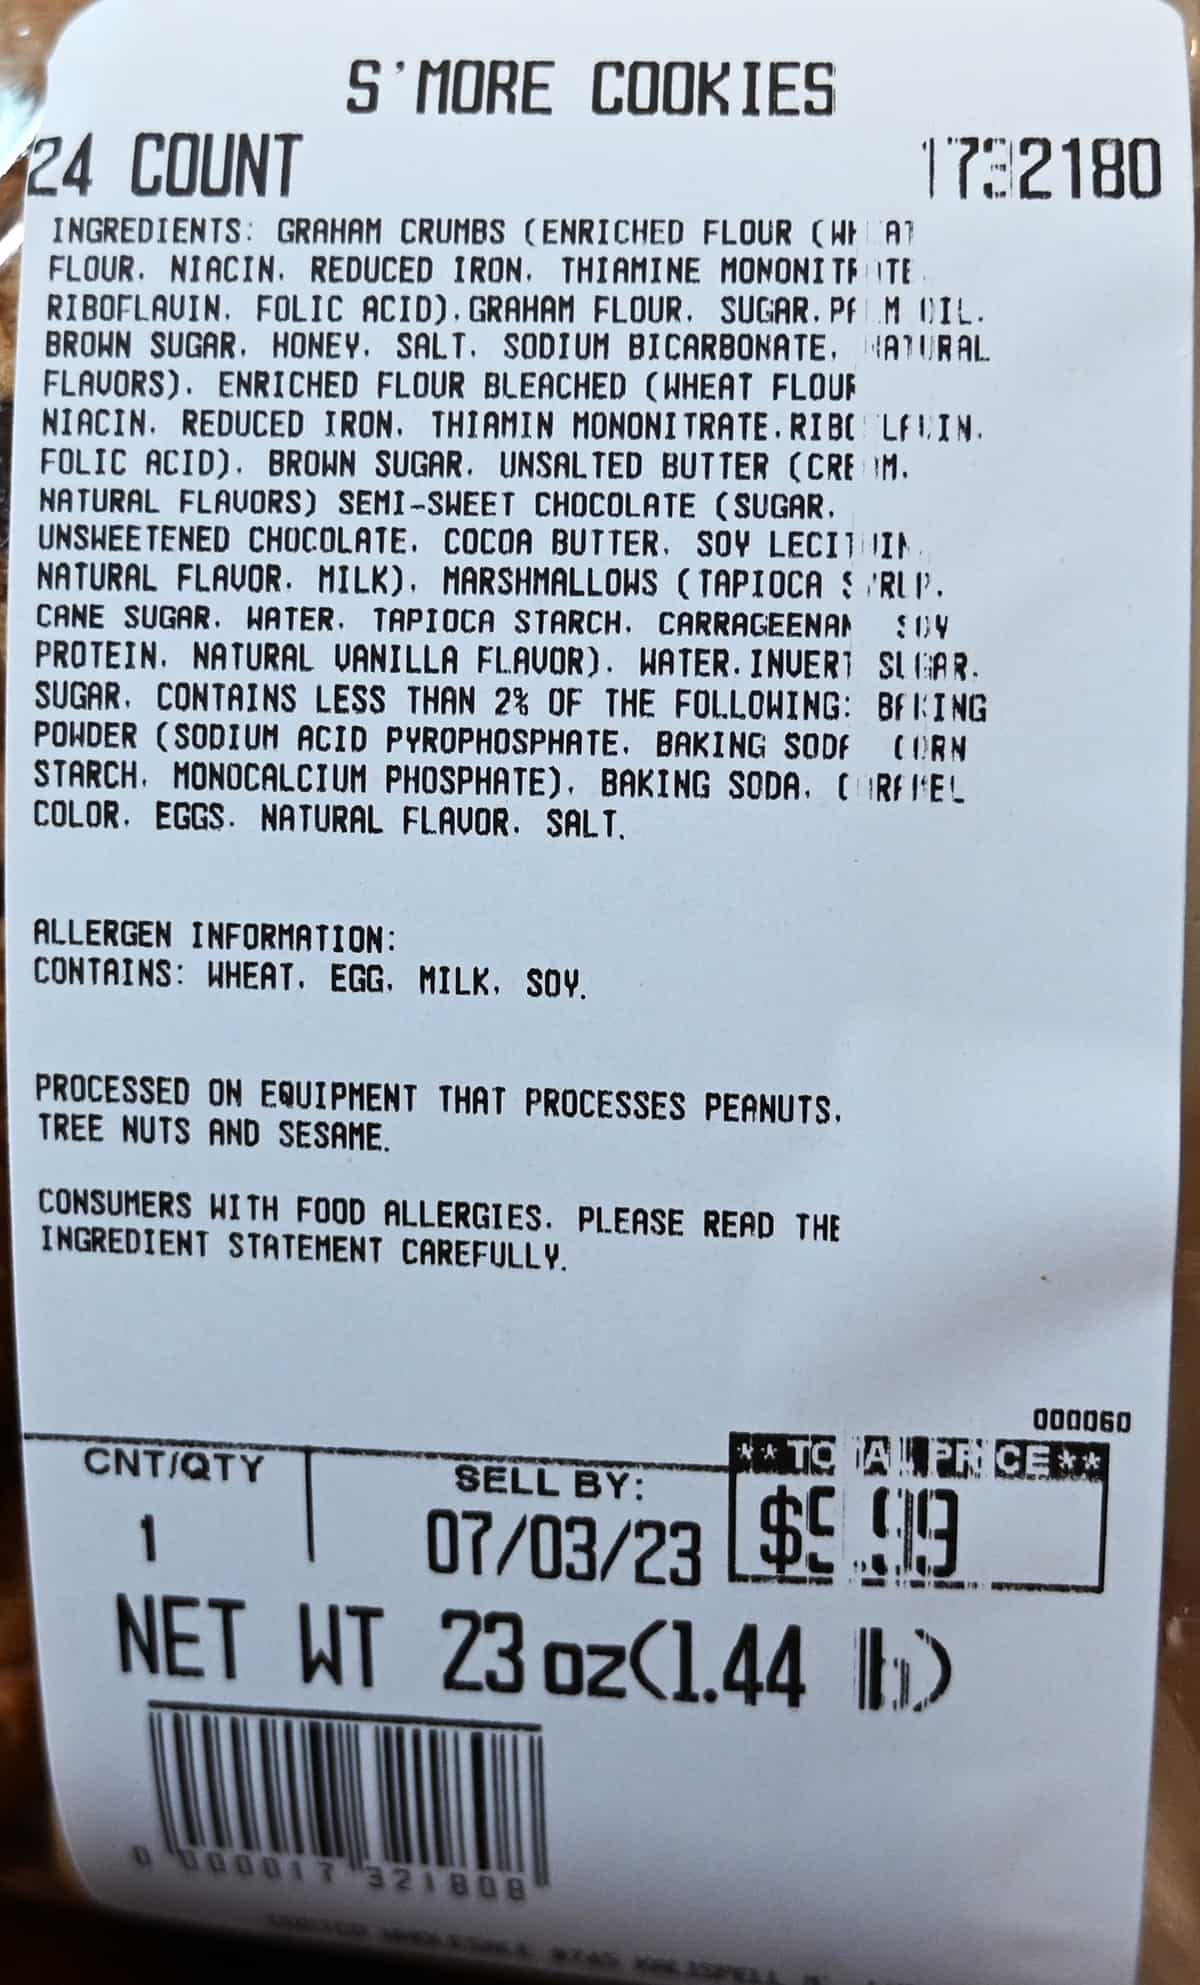 Closeup image of the label on the cookies showing the count, price, best before date and allergen info.